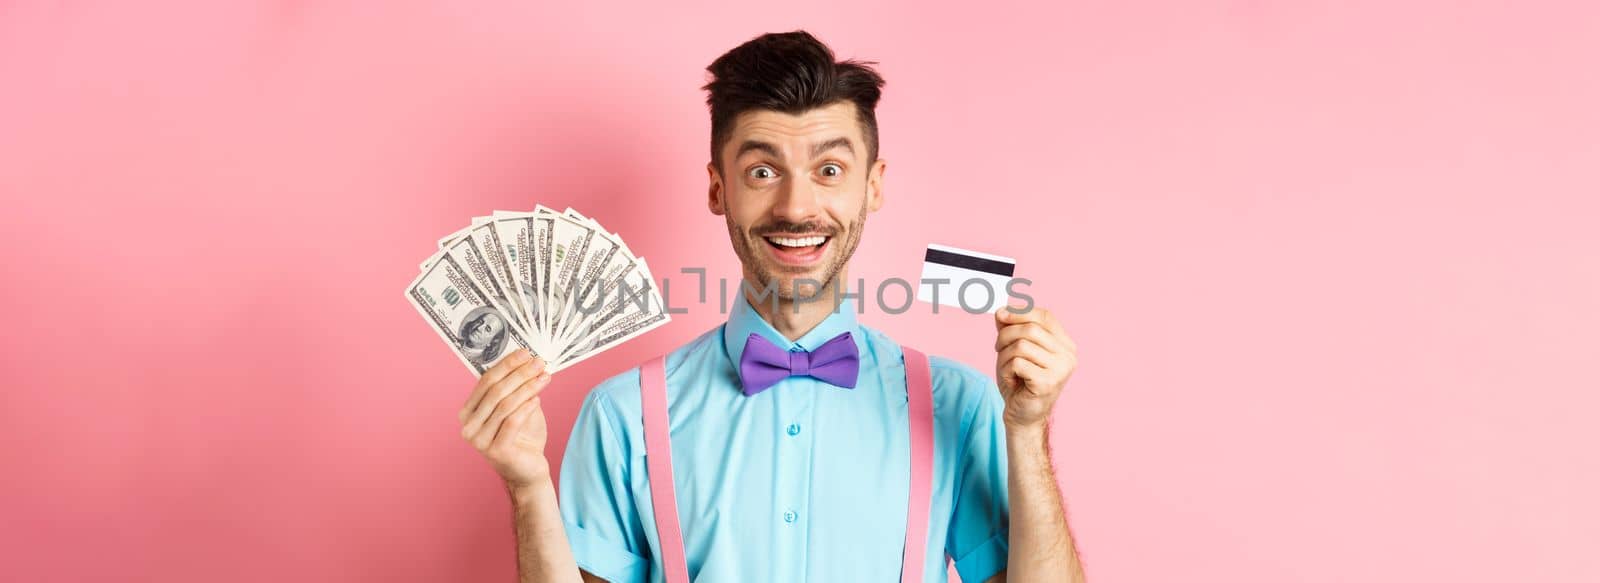 Cheerful caucasian man with moustache and bow-tie showing plastic credit card with money in dollars, smiling at camera, standing over pink background.